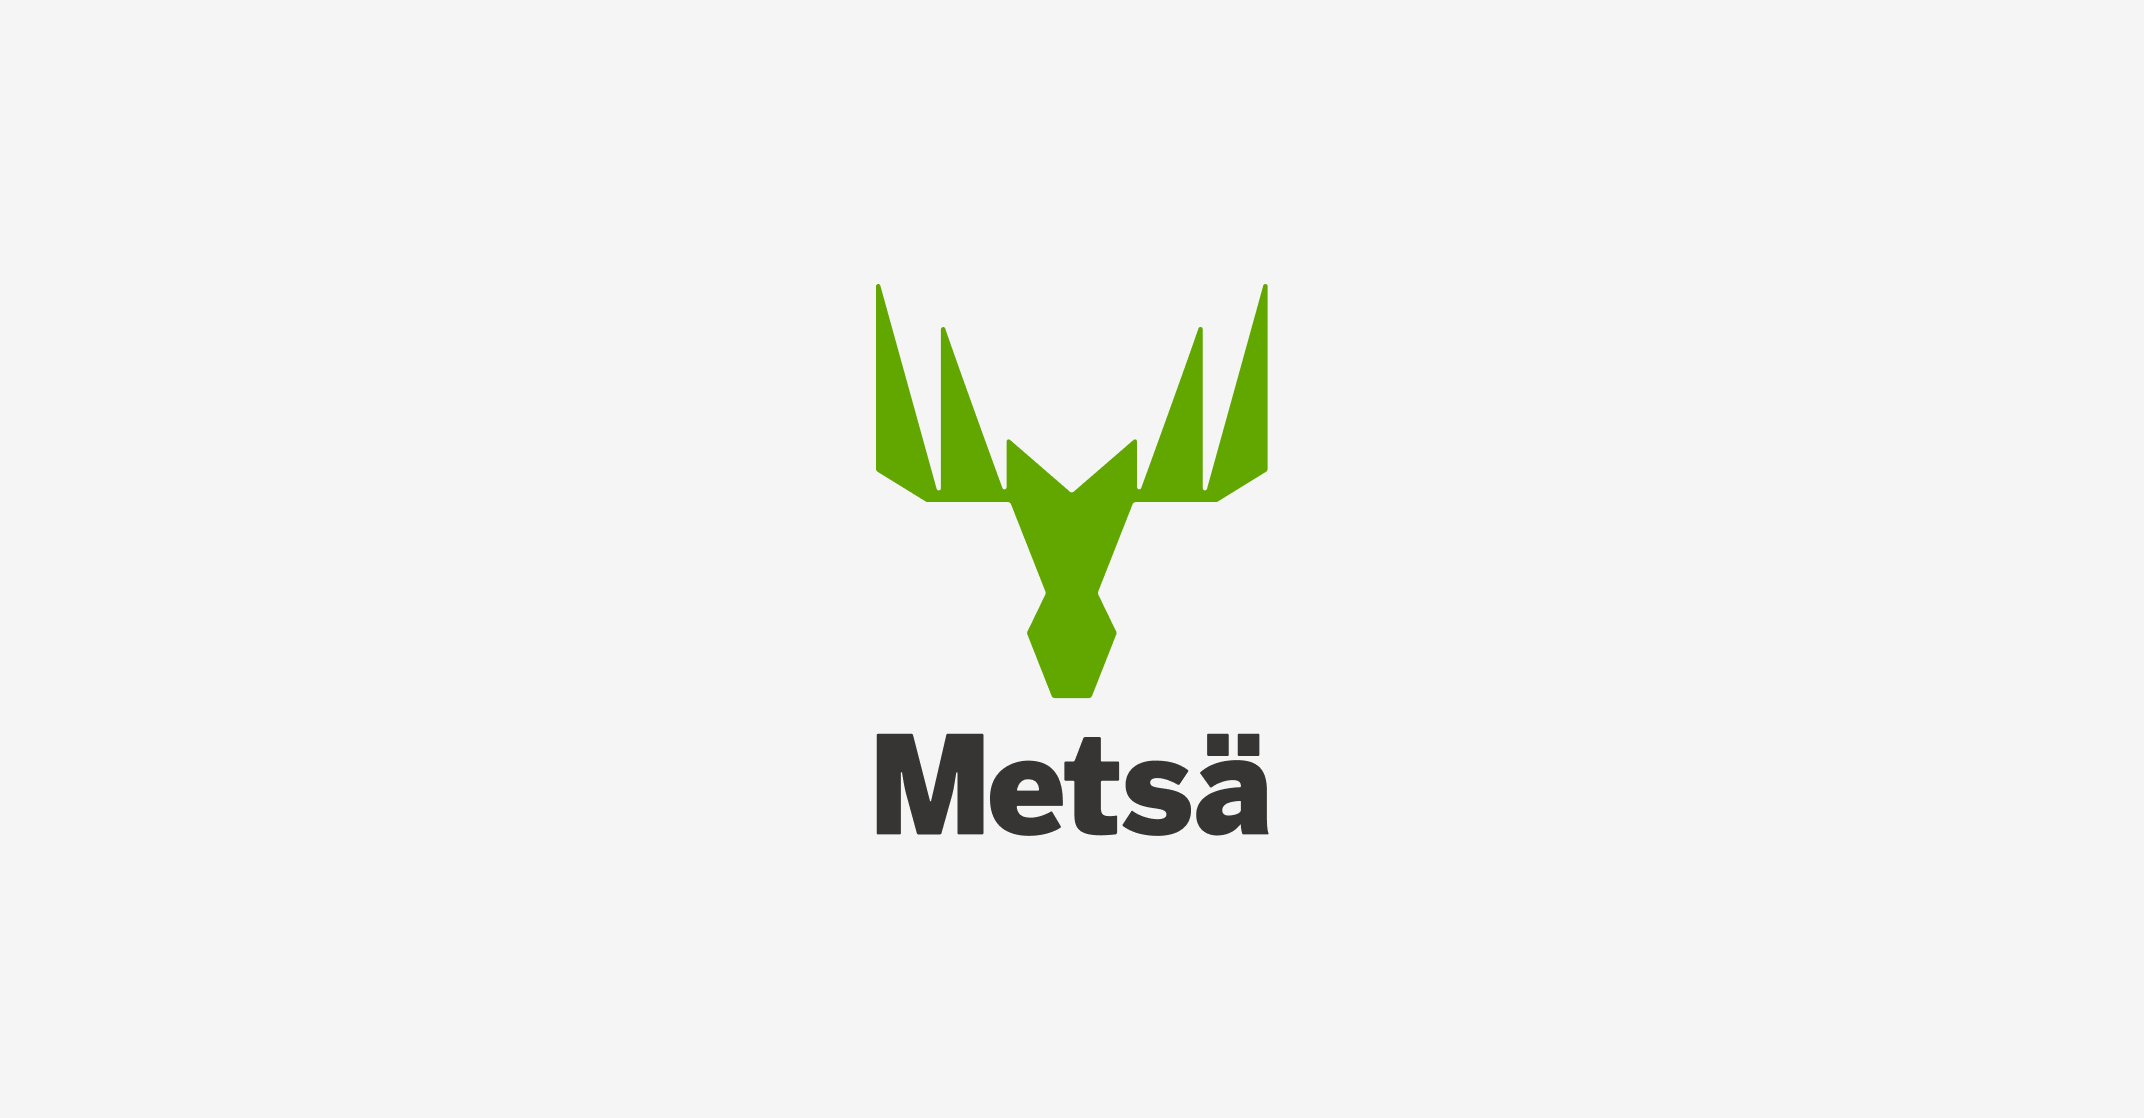 Vertical logo / Complementary version